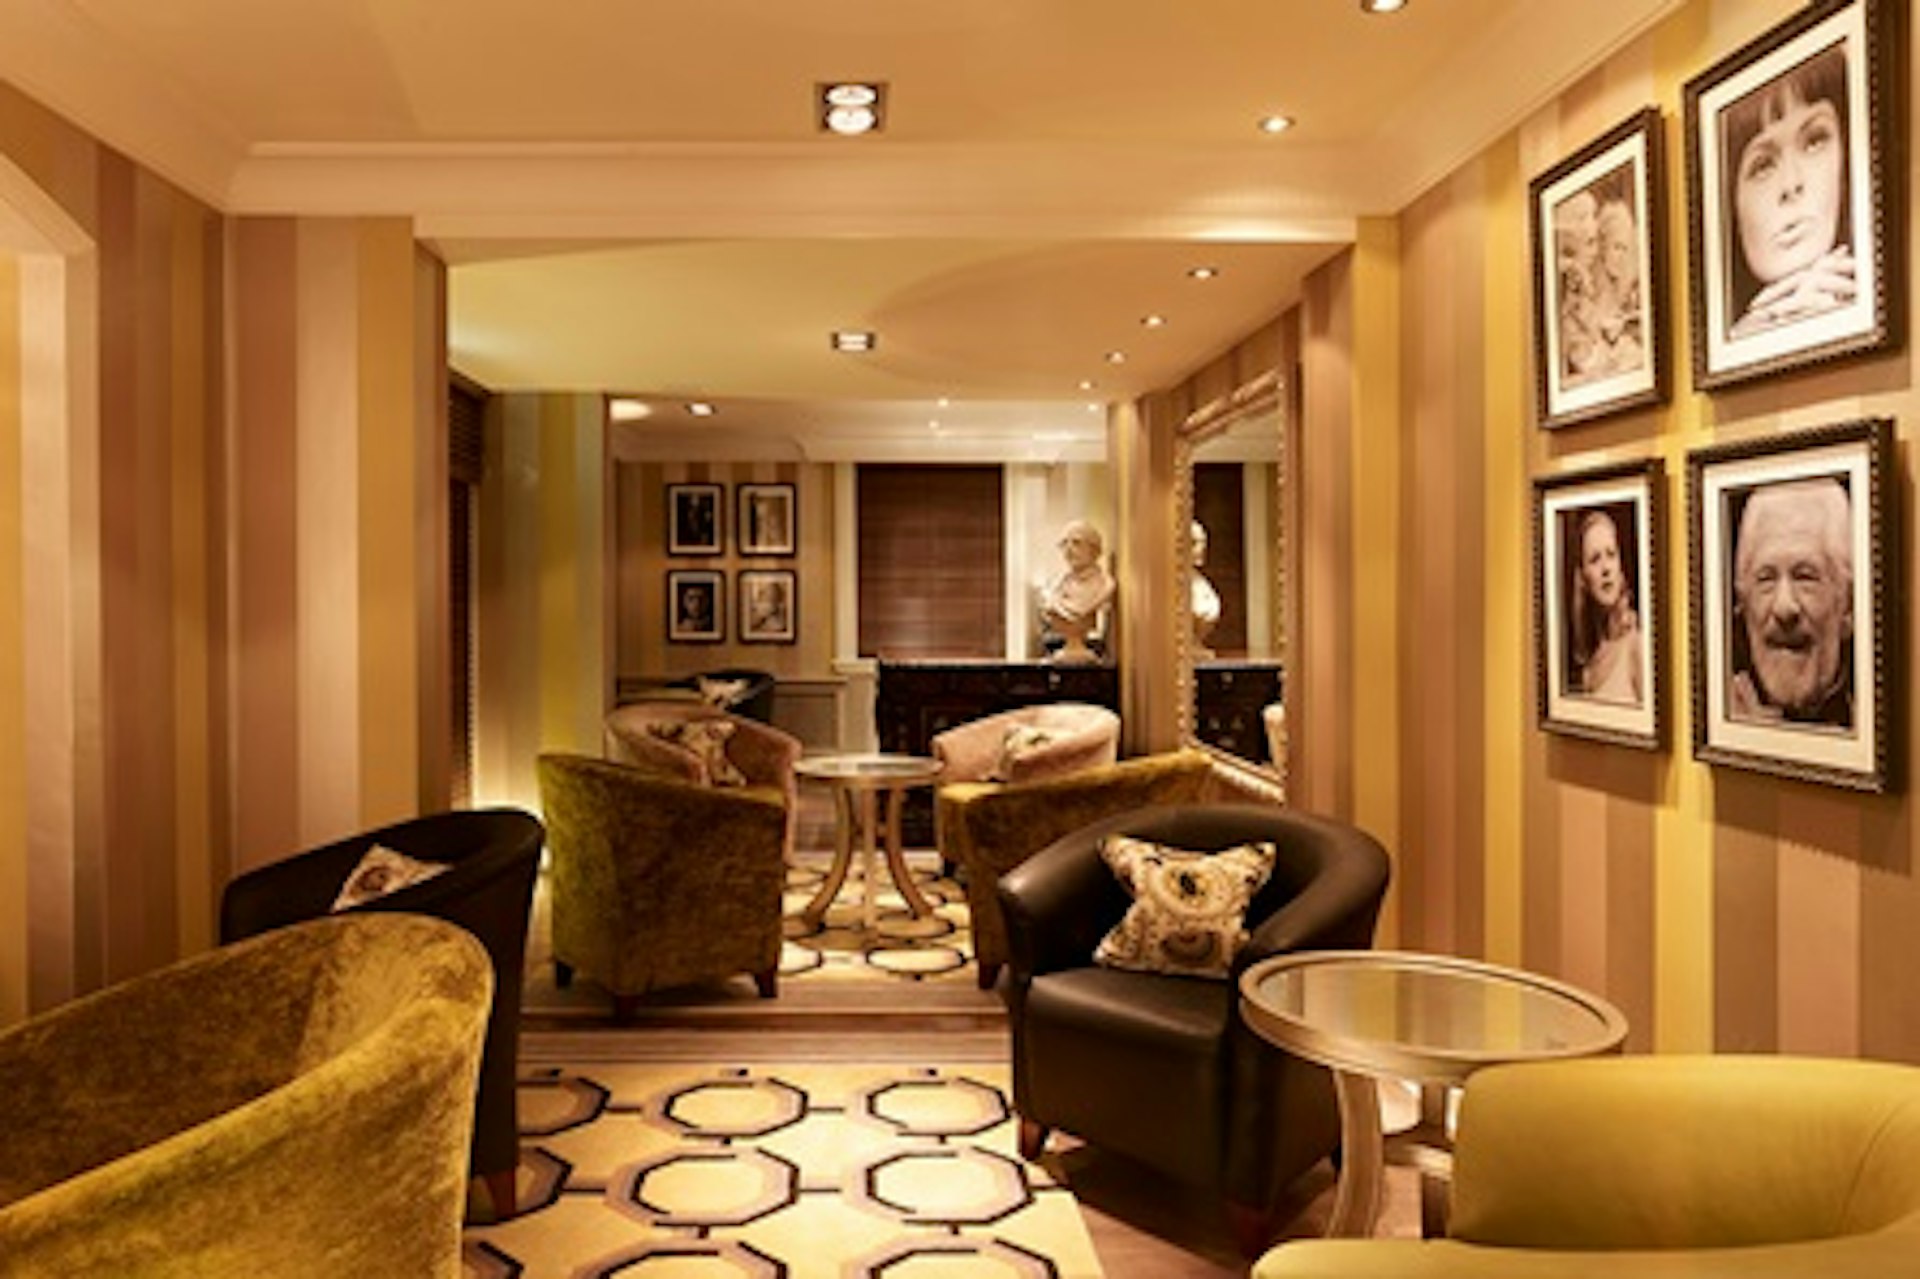 Afternoon Tea for Two at The Arden Hotel in Historic Stratford-upon-Avon 4